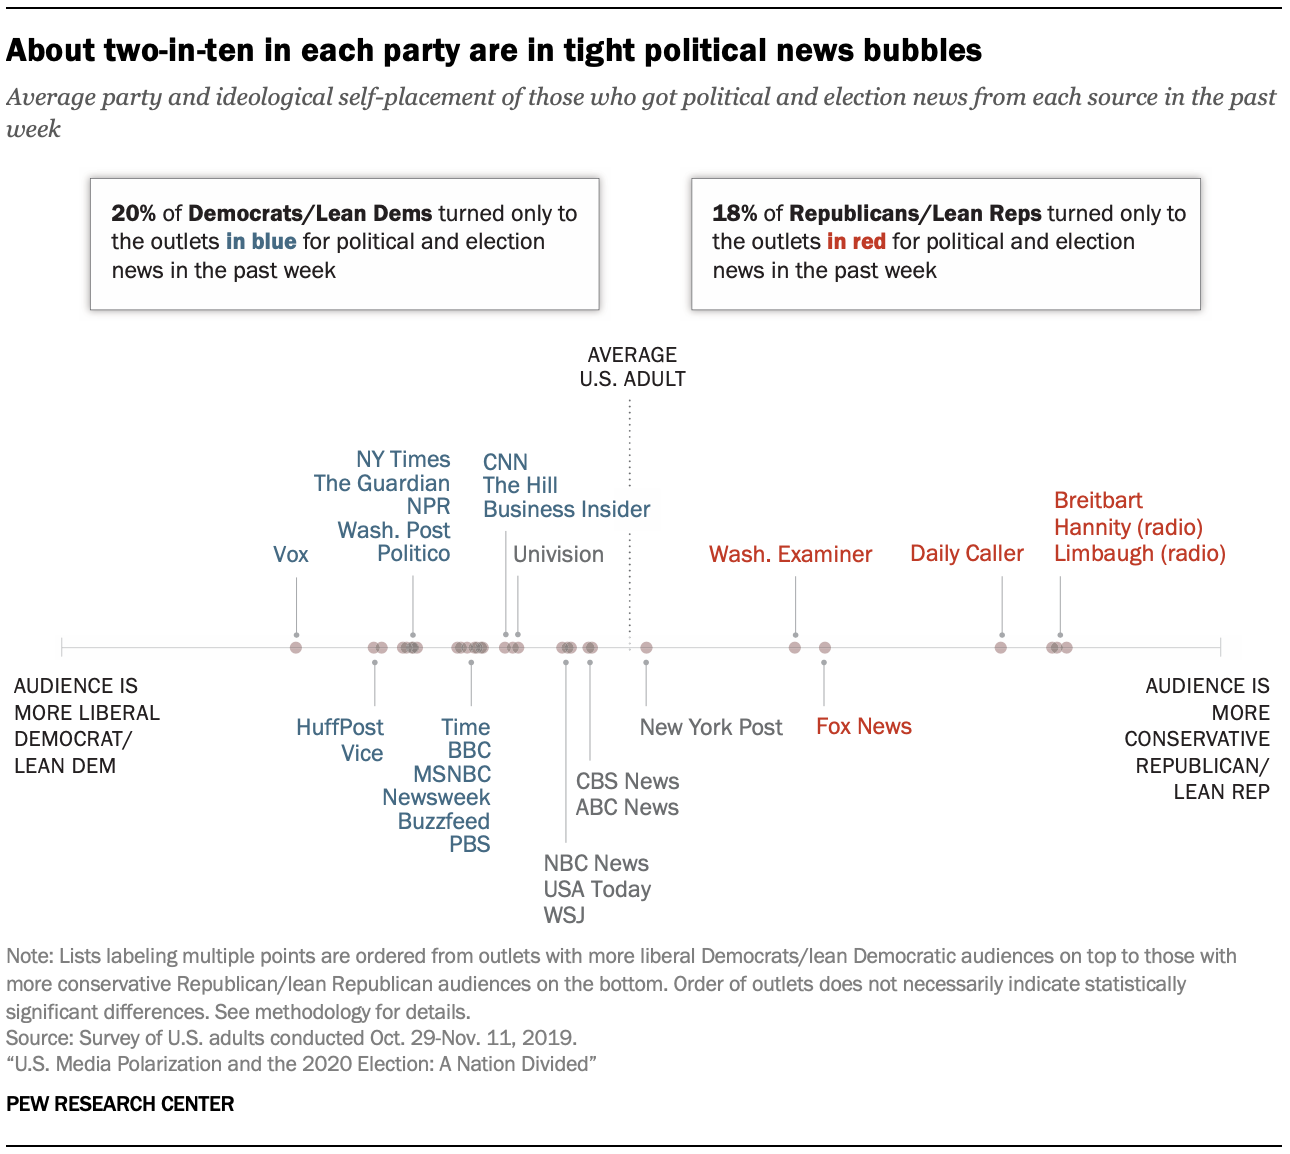 About two-in-ten in each party are in tight political news bubbles